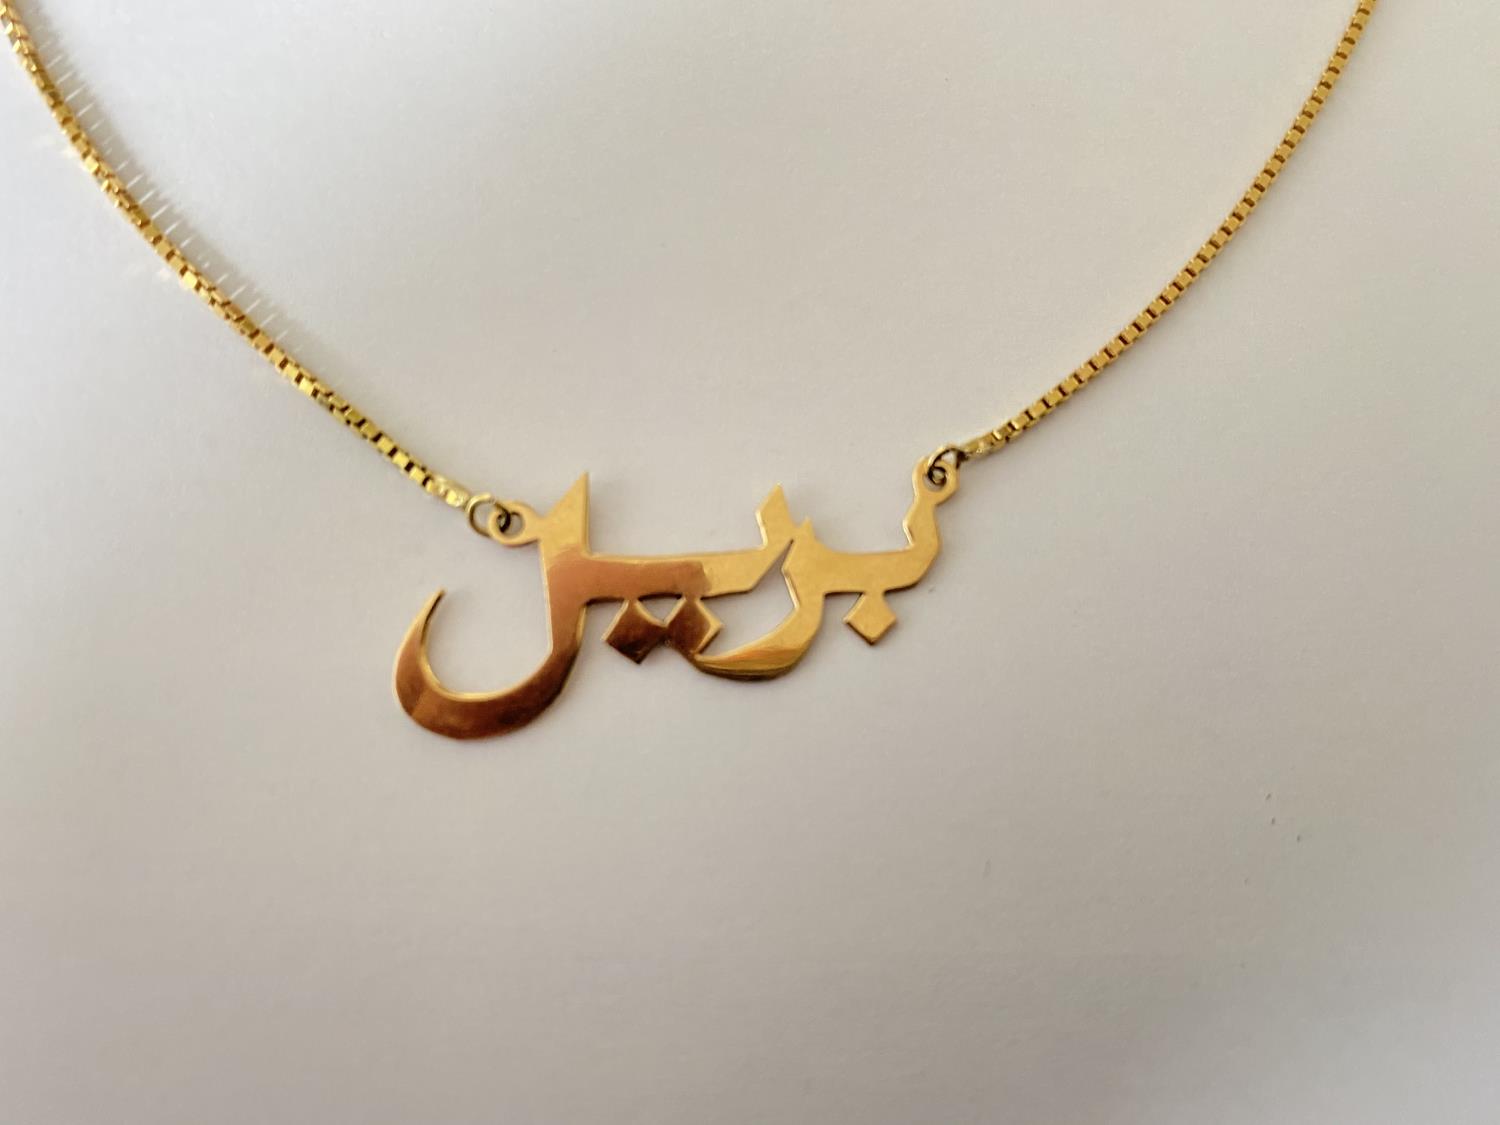 AN 18 CARAT GOLD ISLAMIC SYMBOL PENDANT AND NECKLACE CHAIN. WEIGHT 6.9 GRAMS, CHAIN 44 CM - Bild 2 aus 2